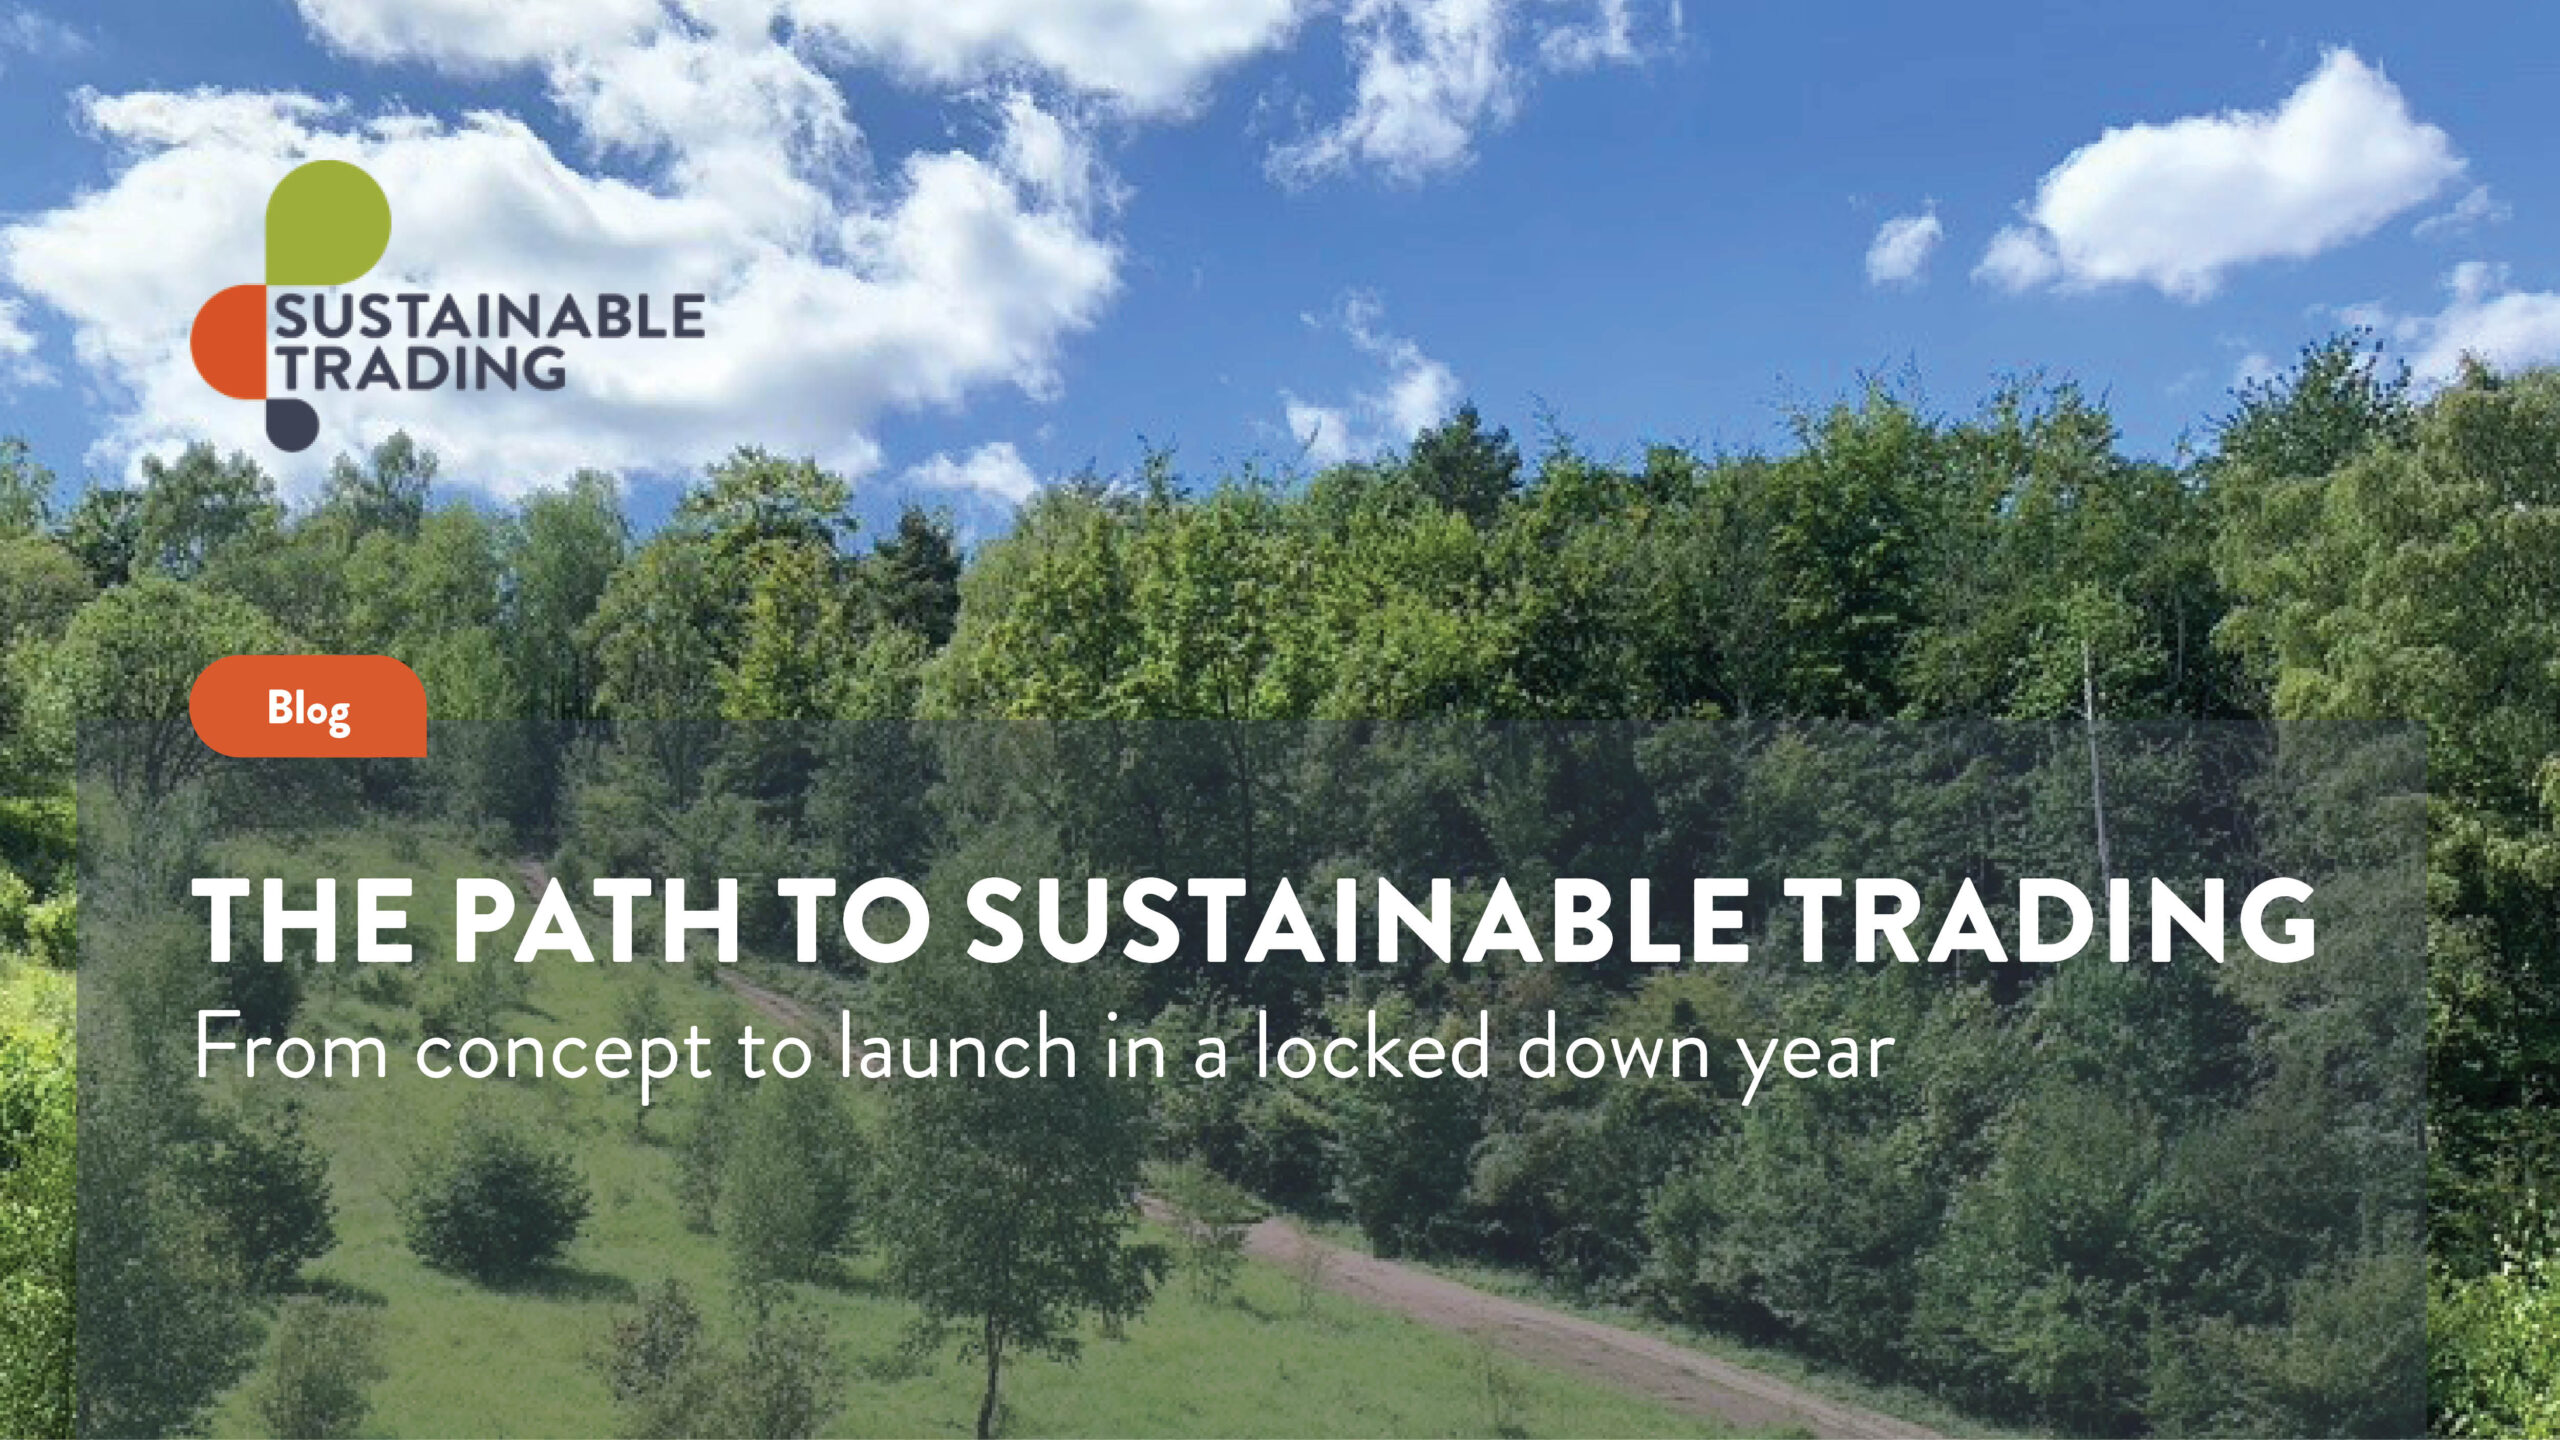 The path to Sustainable Trading: From concept to launch in a locked down year